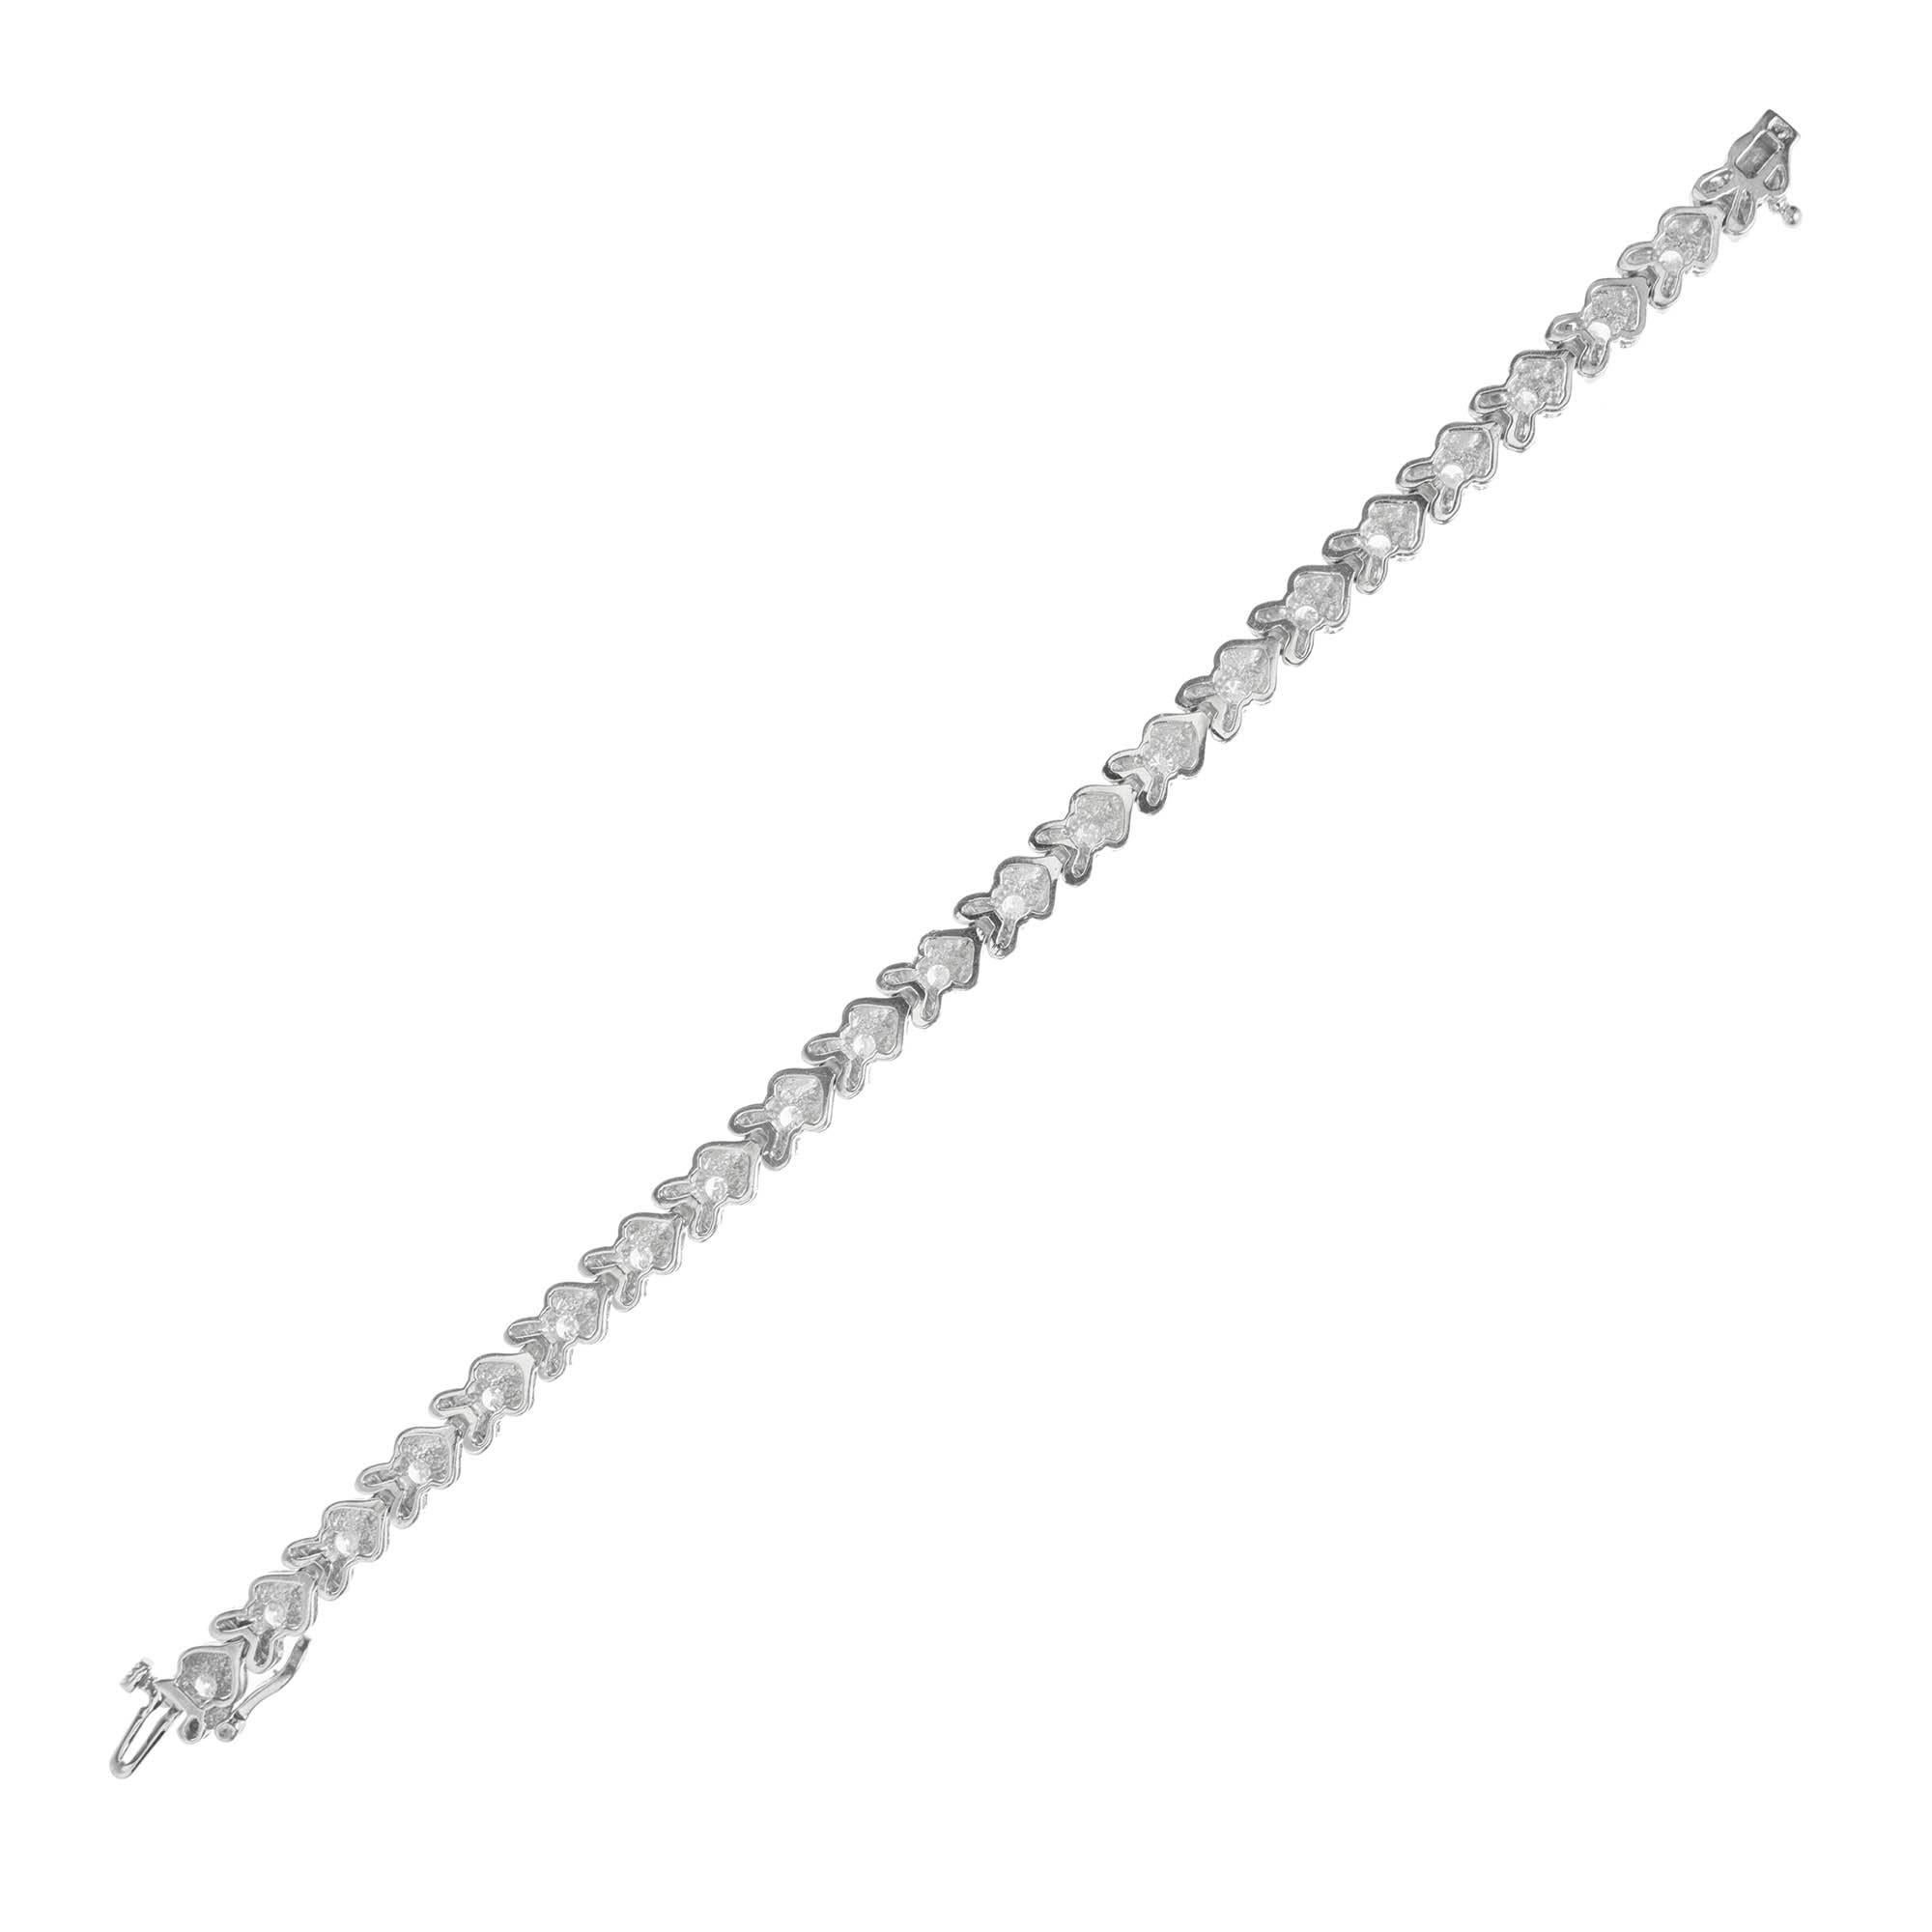 Peter Suchy Chevron Design diamond 14k white gold link bracelet with built in box catch and secure side lock safety.  The bracelet is set with well-cut high grade full cut sparkly diamonds.

22 round full cut diamonds F VS2- SI1 approximate 2.65